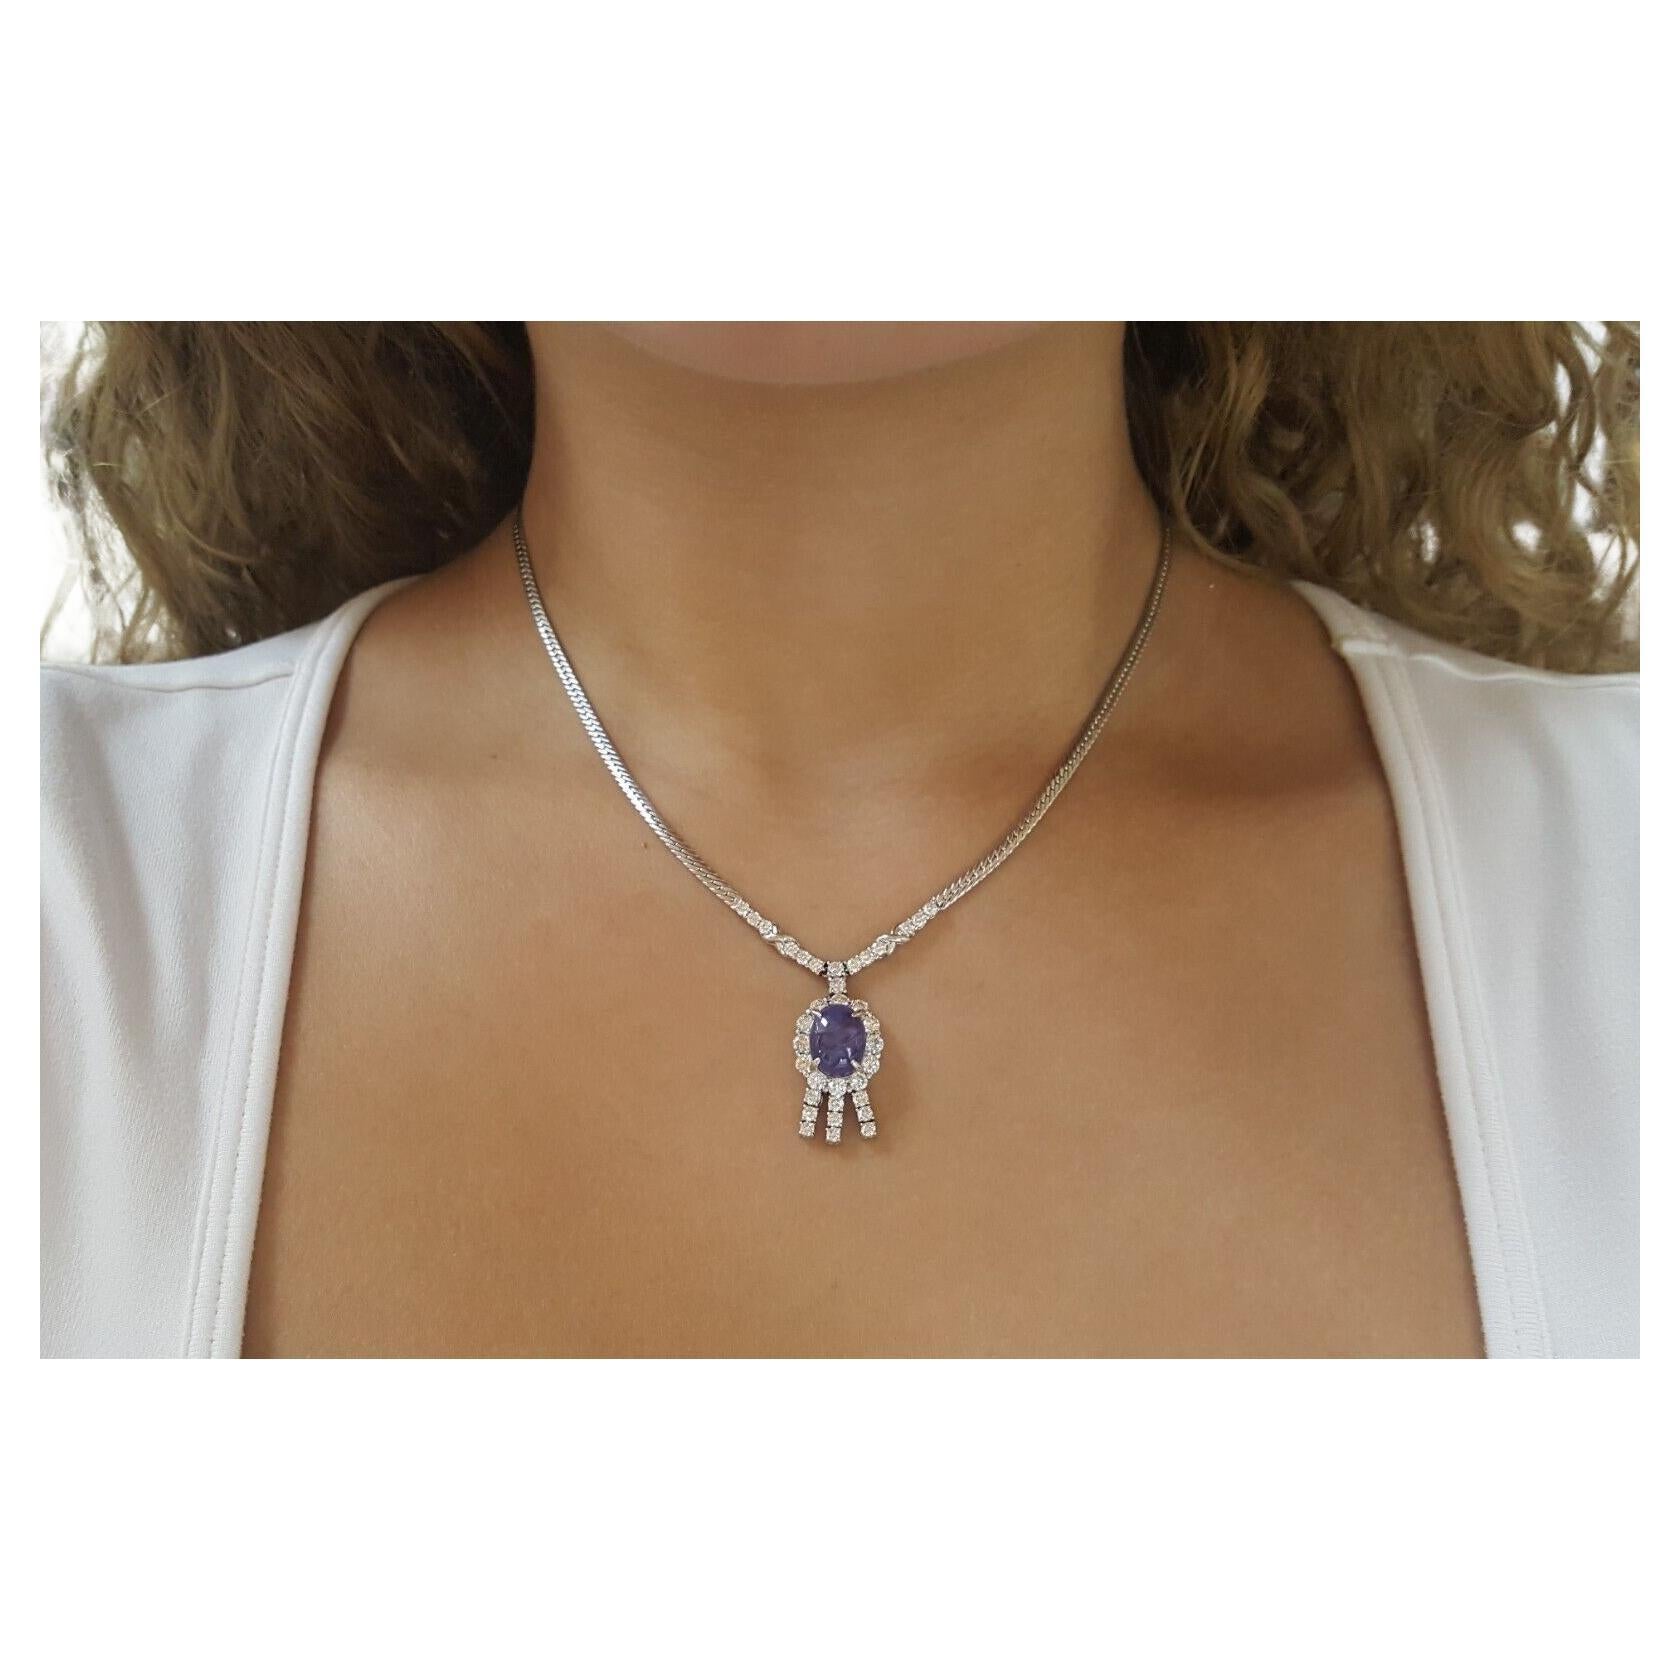  9 Carat Cabochon Star Sapphire with 2 Ct. Round Brilliant Cut Diamond Necklace In New Condition For Sale In Rome, IT